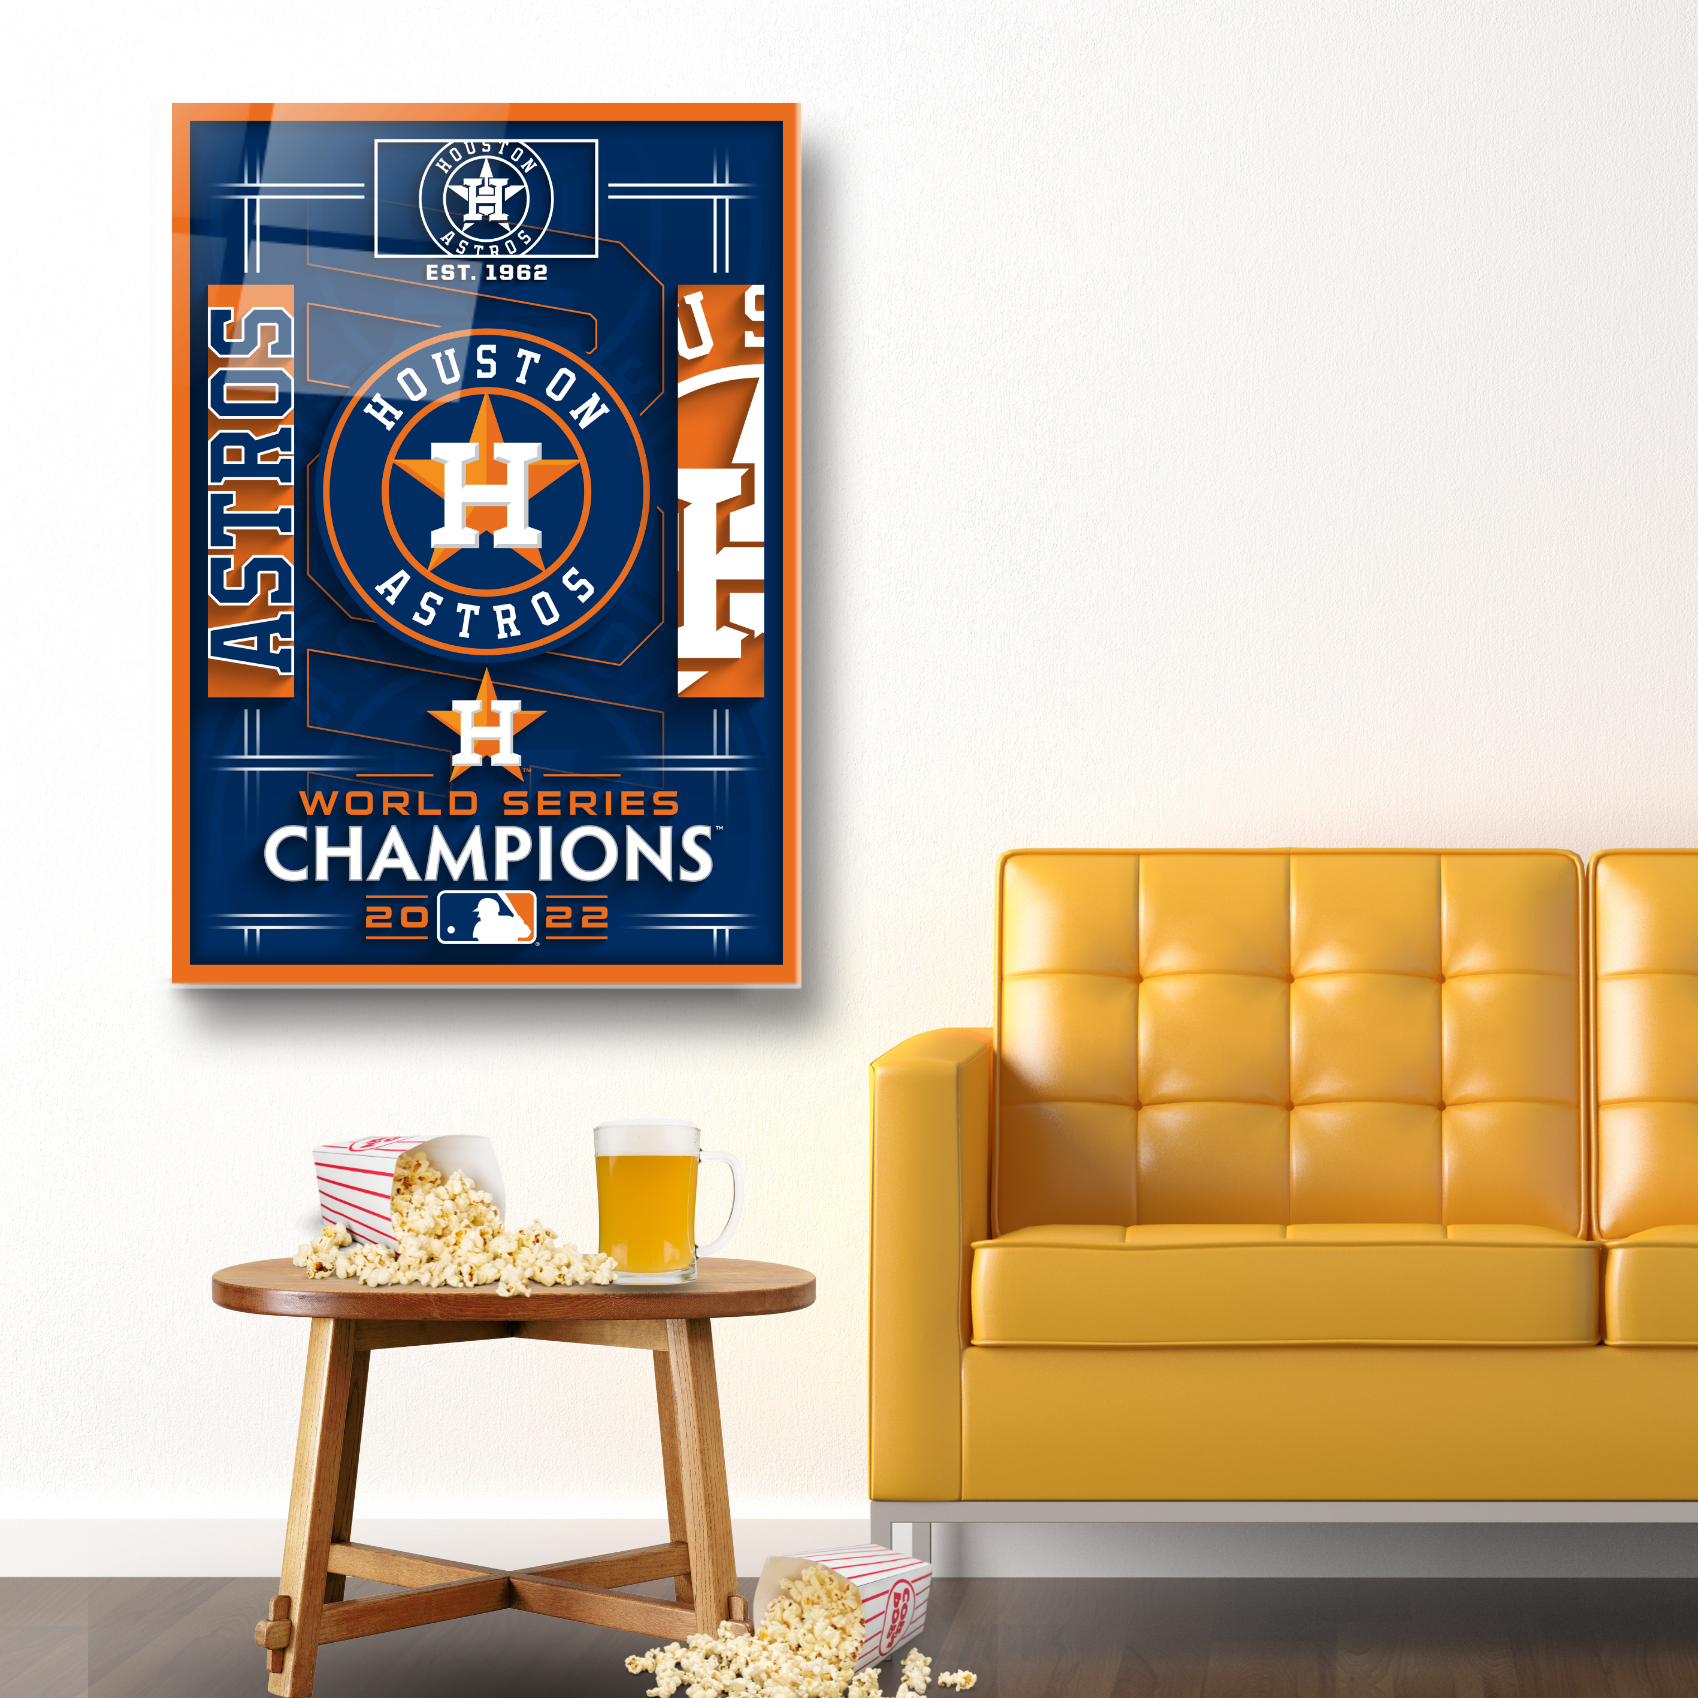 2022 MLB World Series Champions Houston Astros Framed Wall Decor Featuring  An Image Of Key Players & The Individual Game Scores